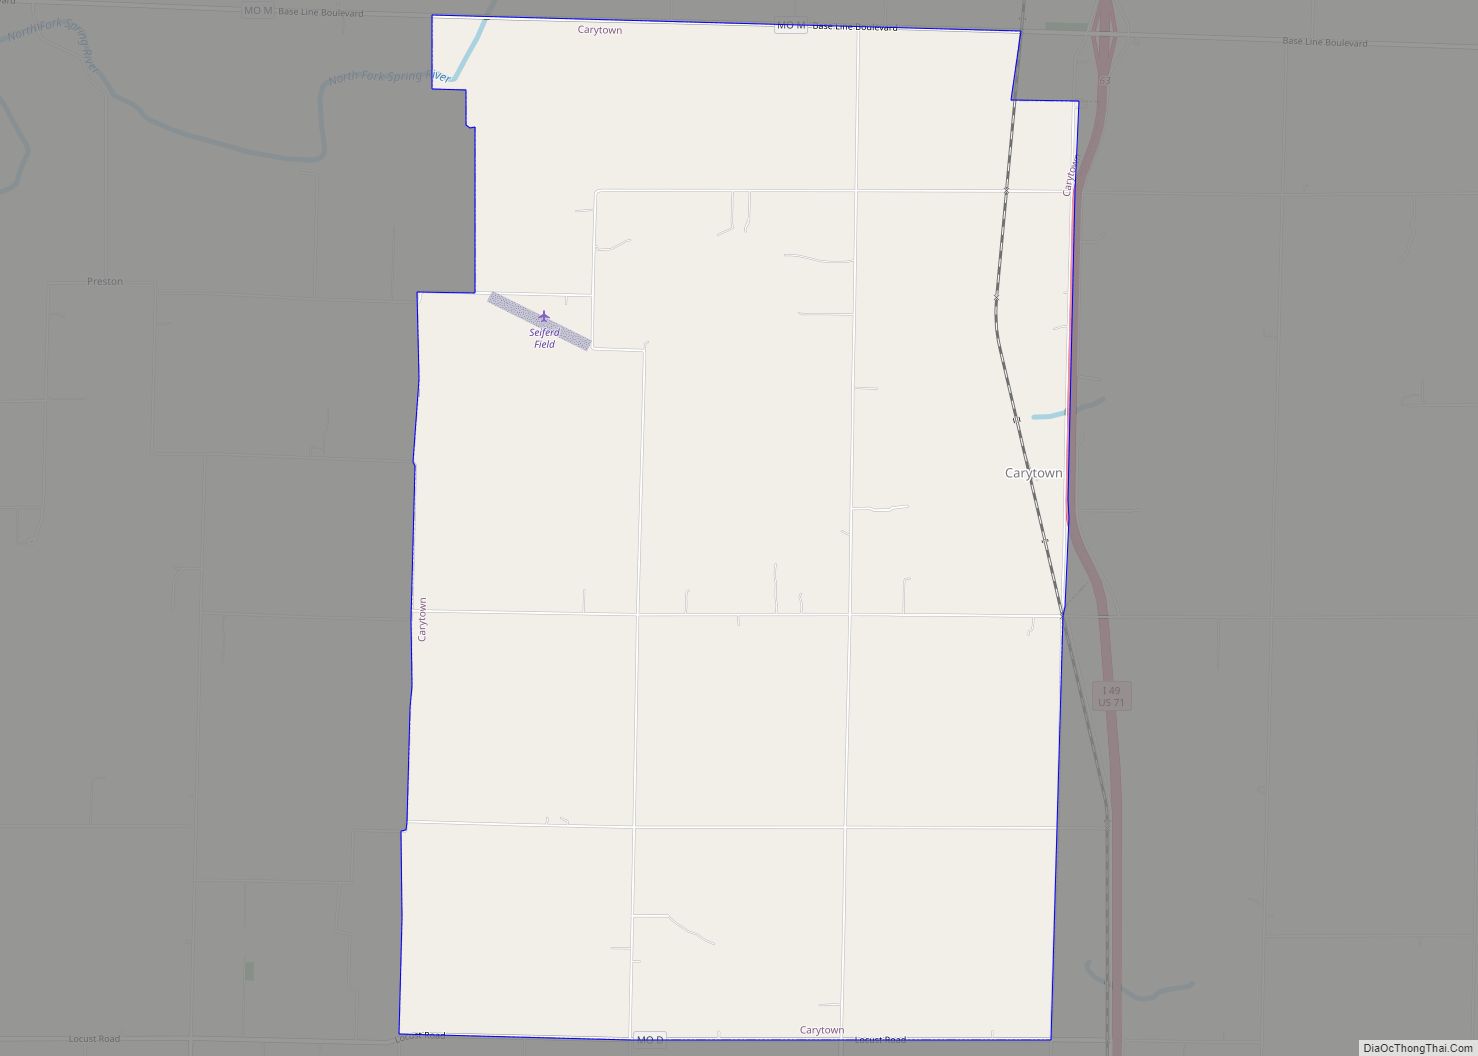 Map of Carytown city